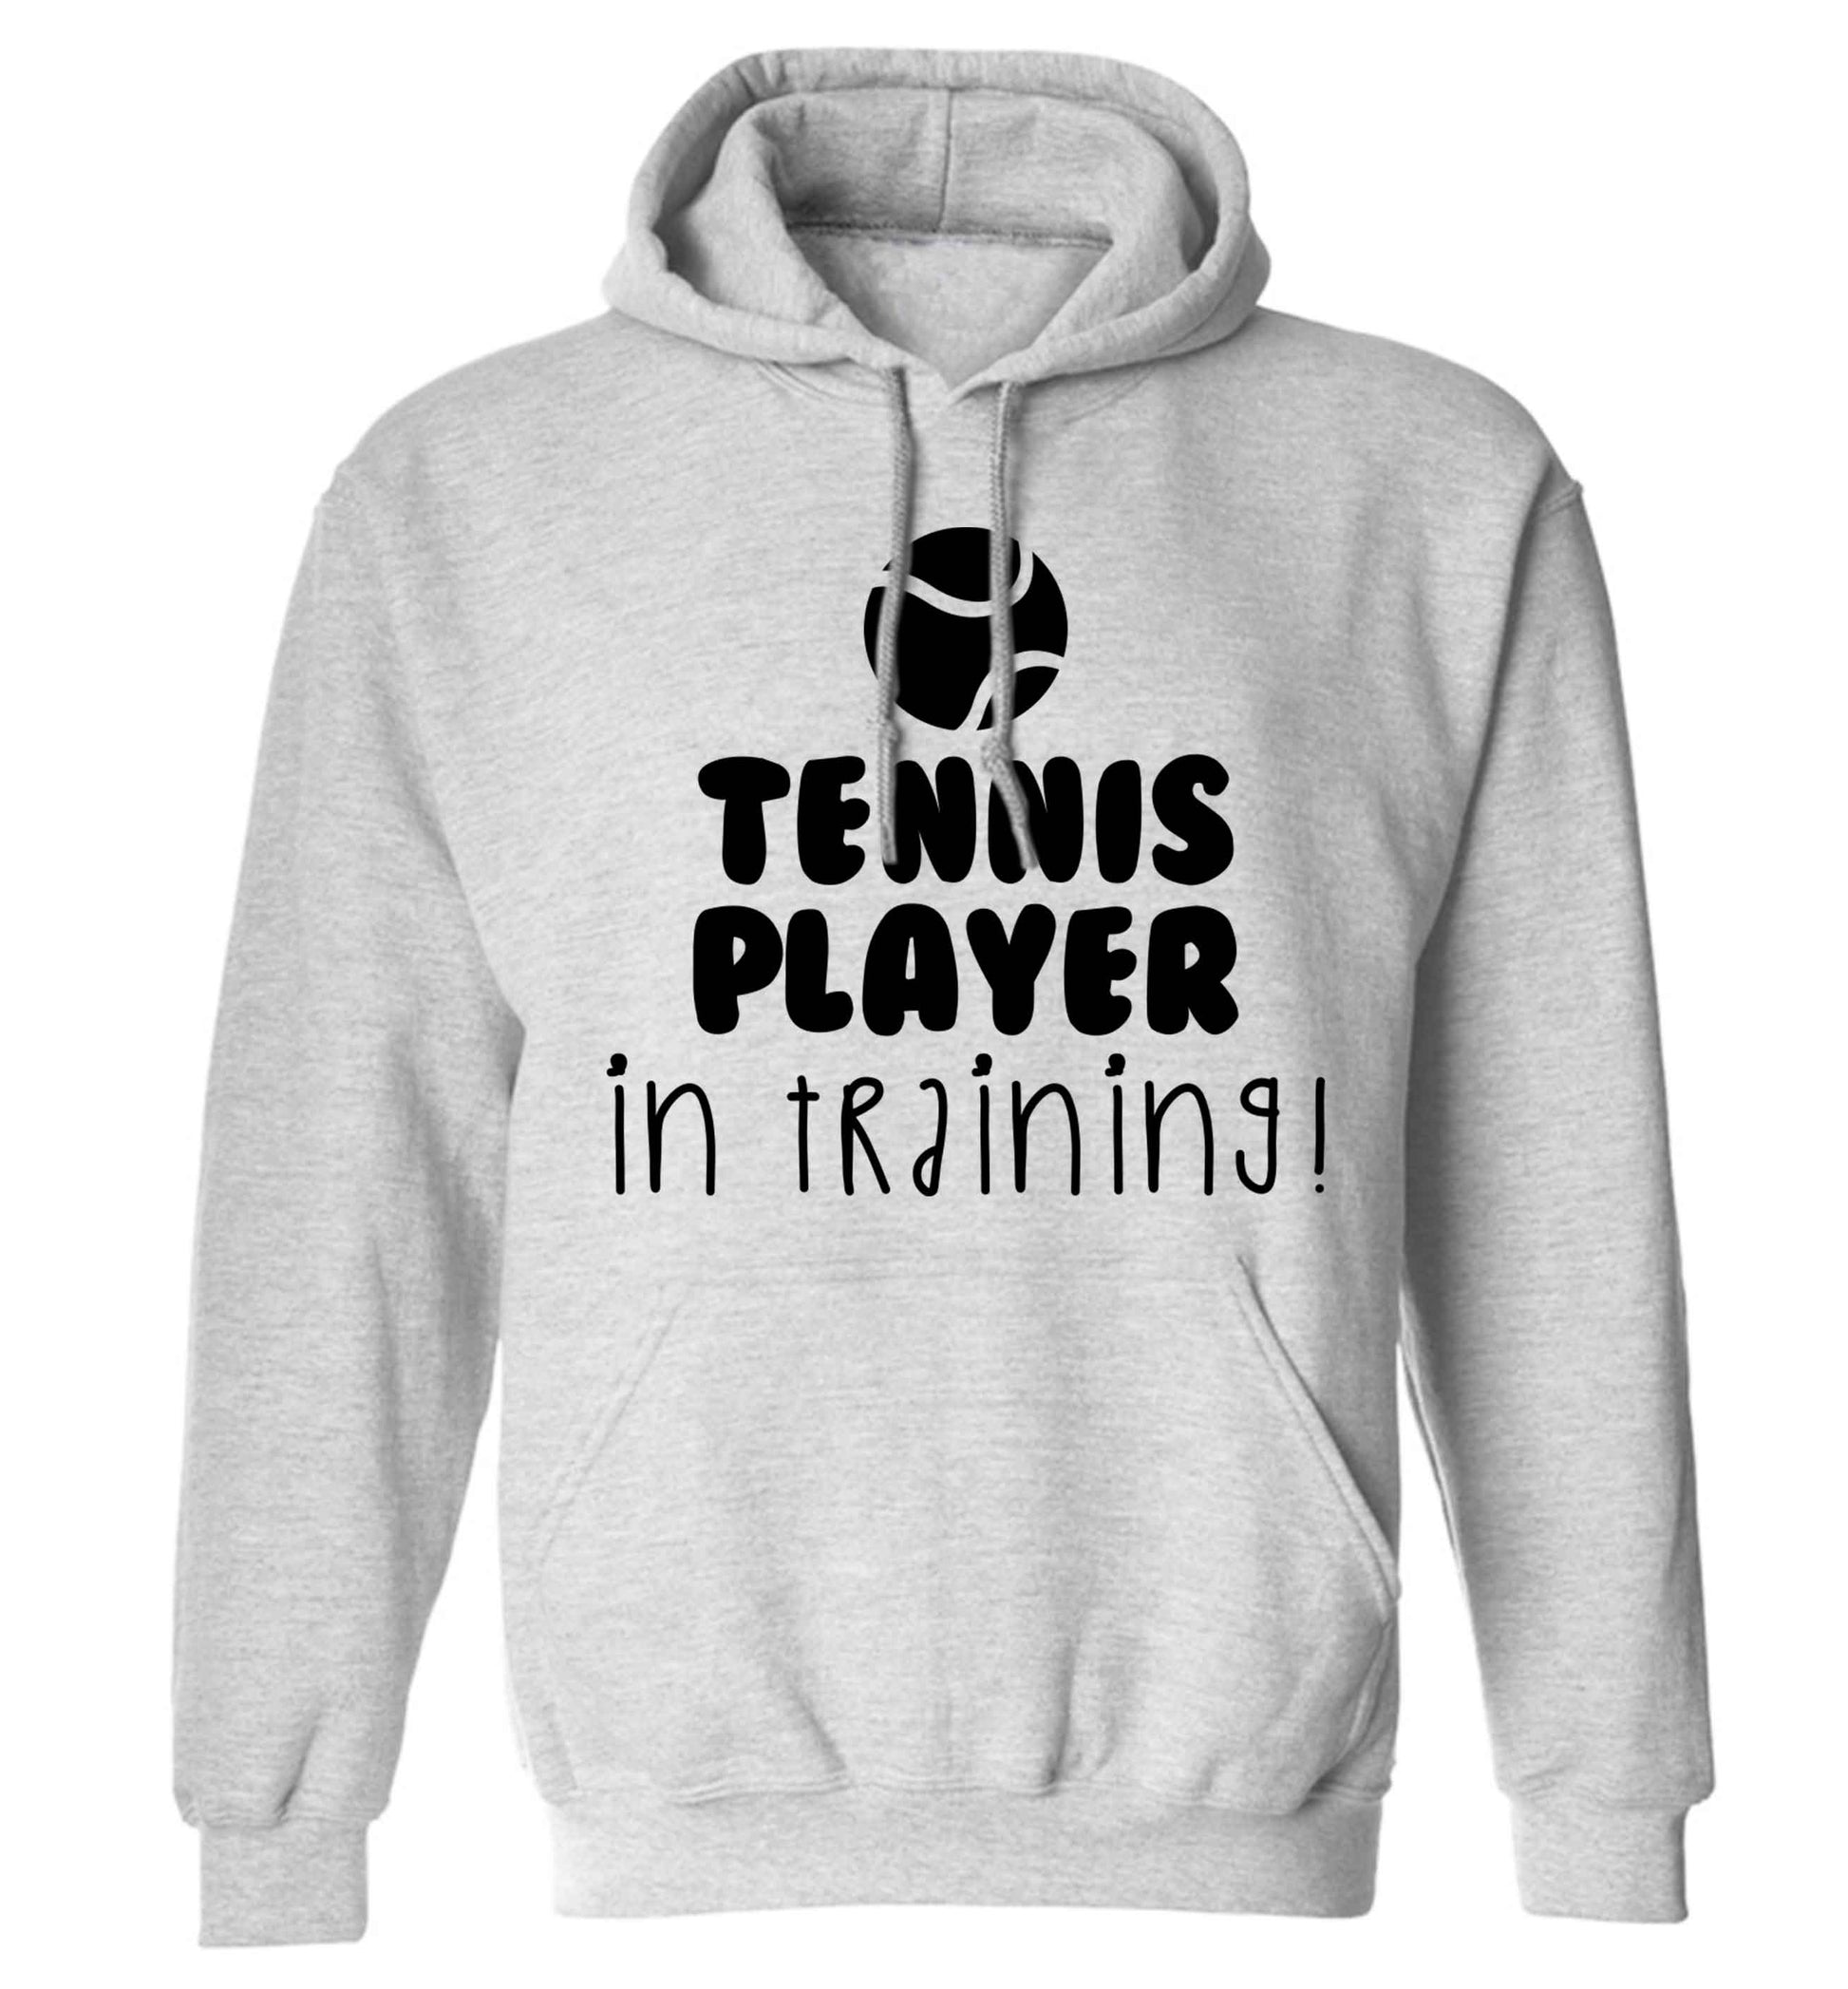 Tennis player in training adults unisex grey hoodie 2XL